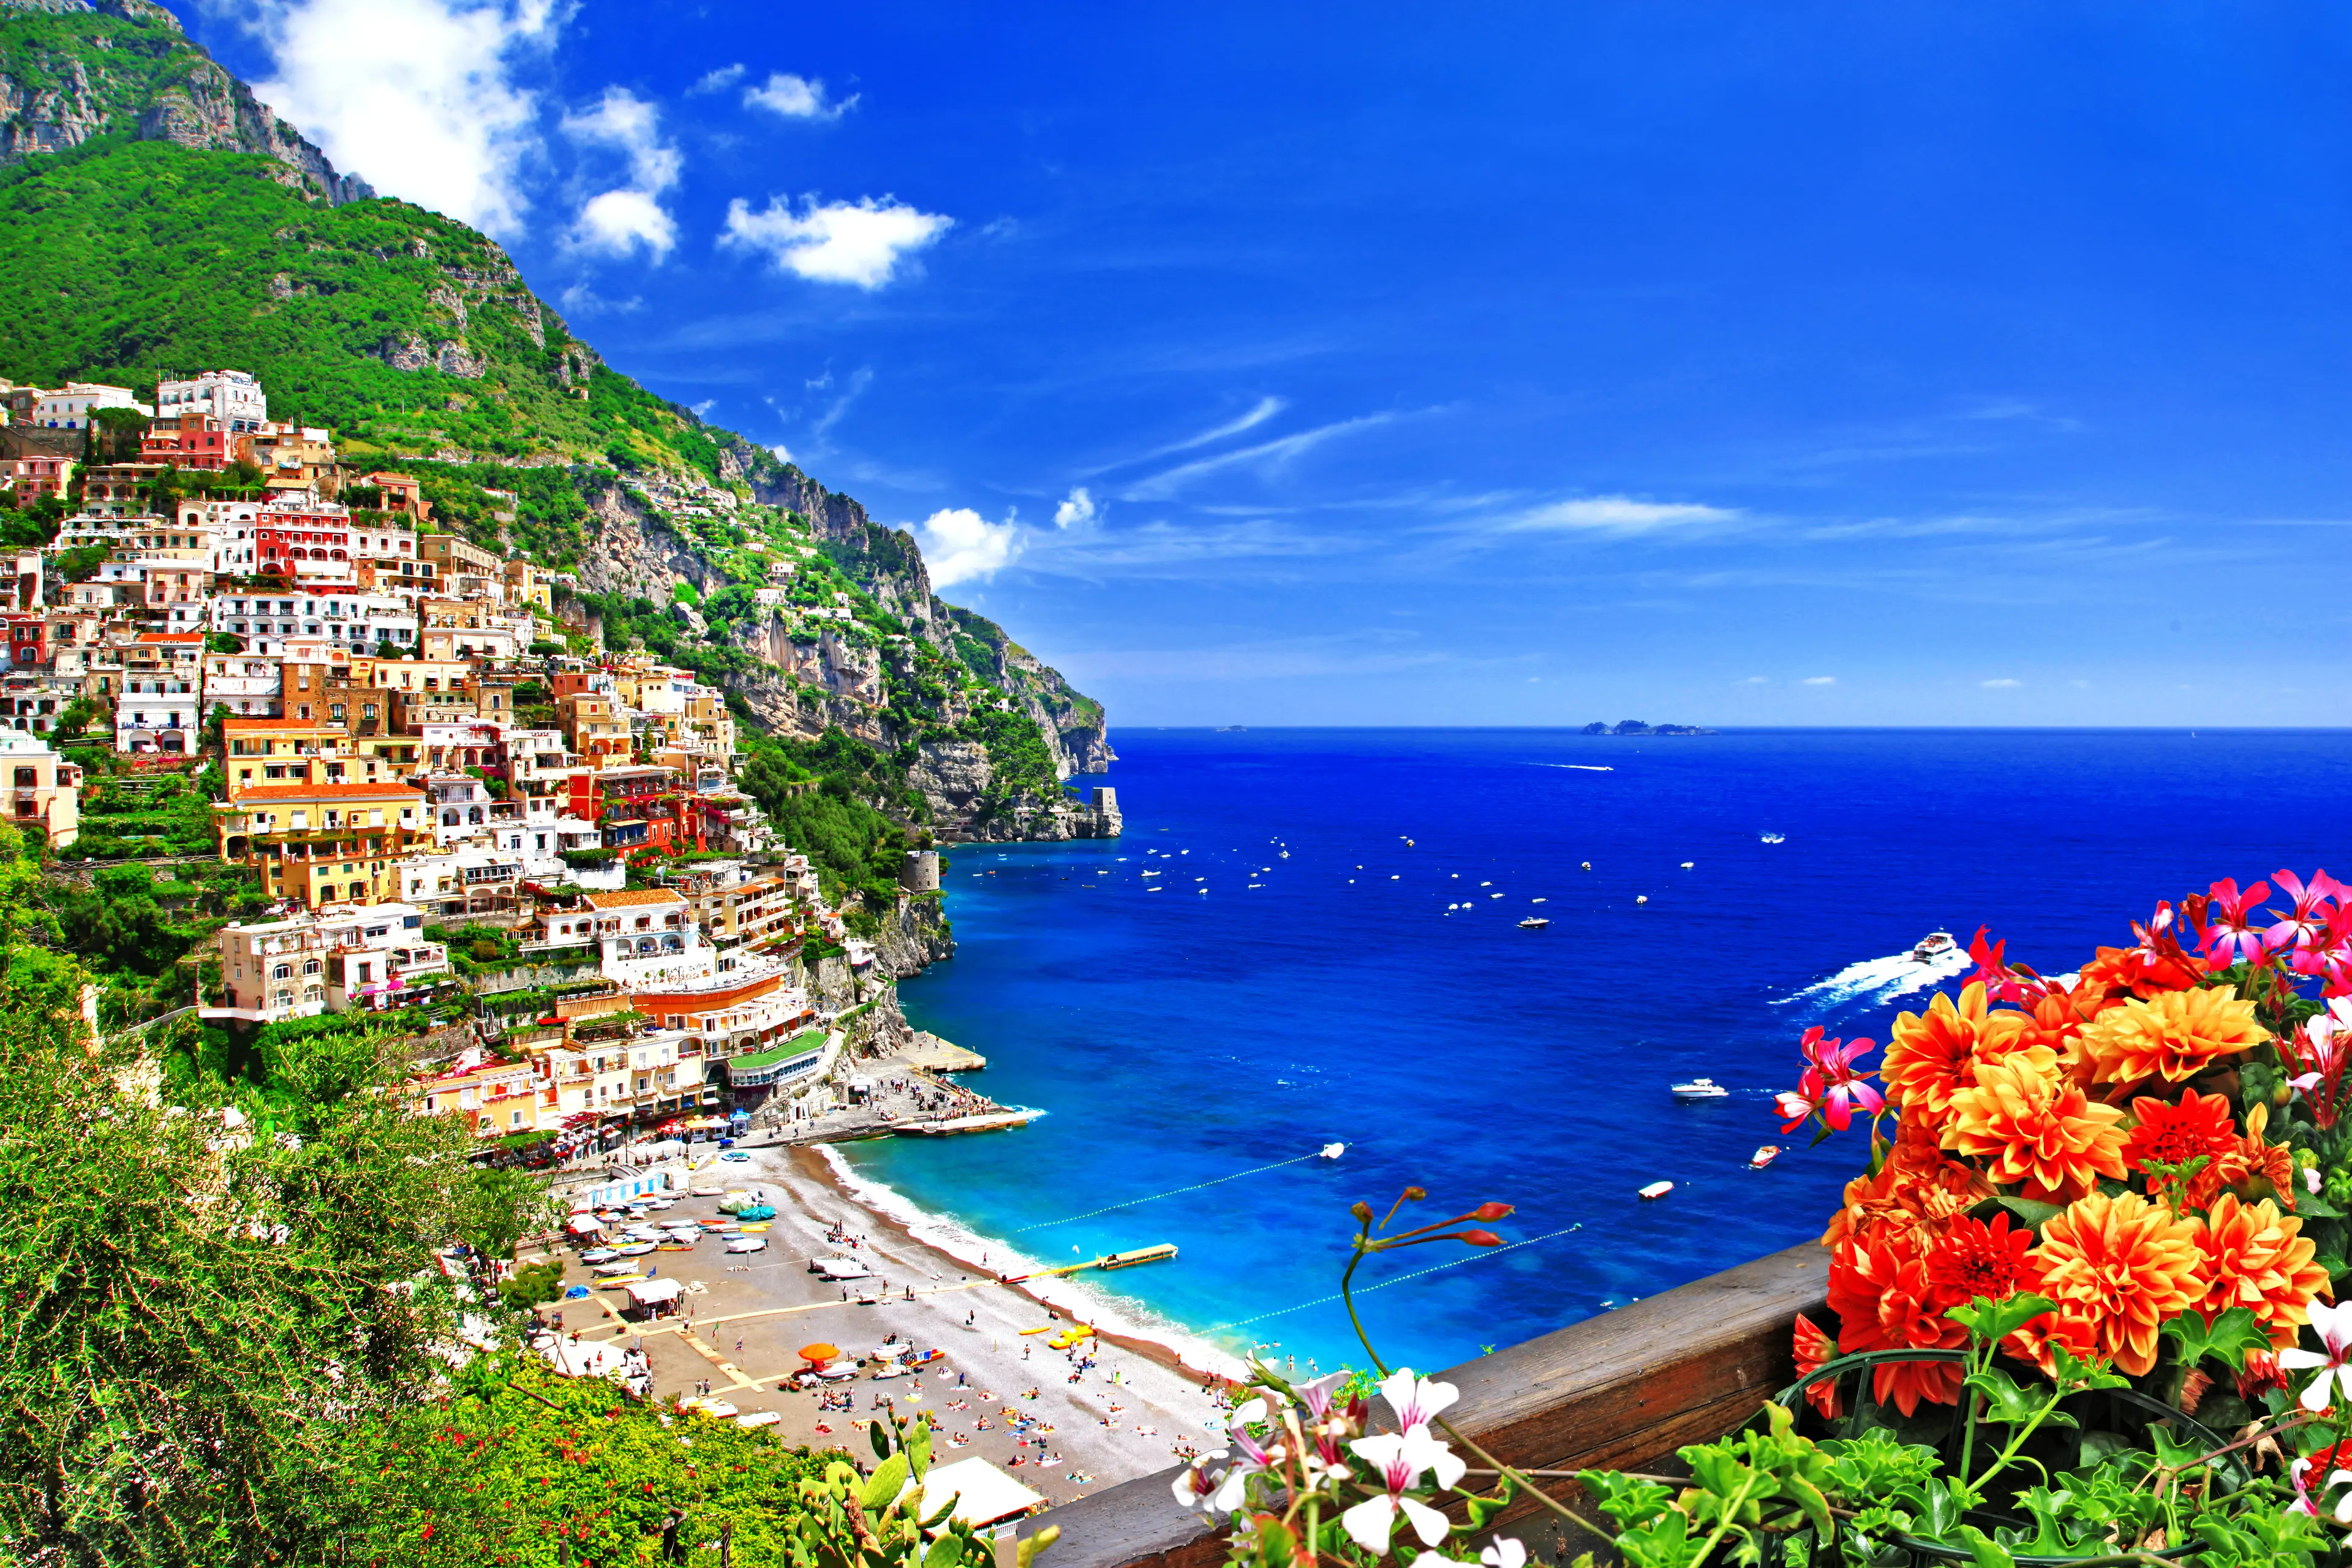 2-Day Amalfi Coast Adventure: Sightseeing and Nightlife with Friends